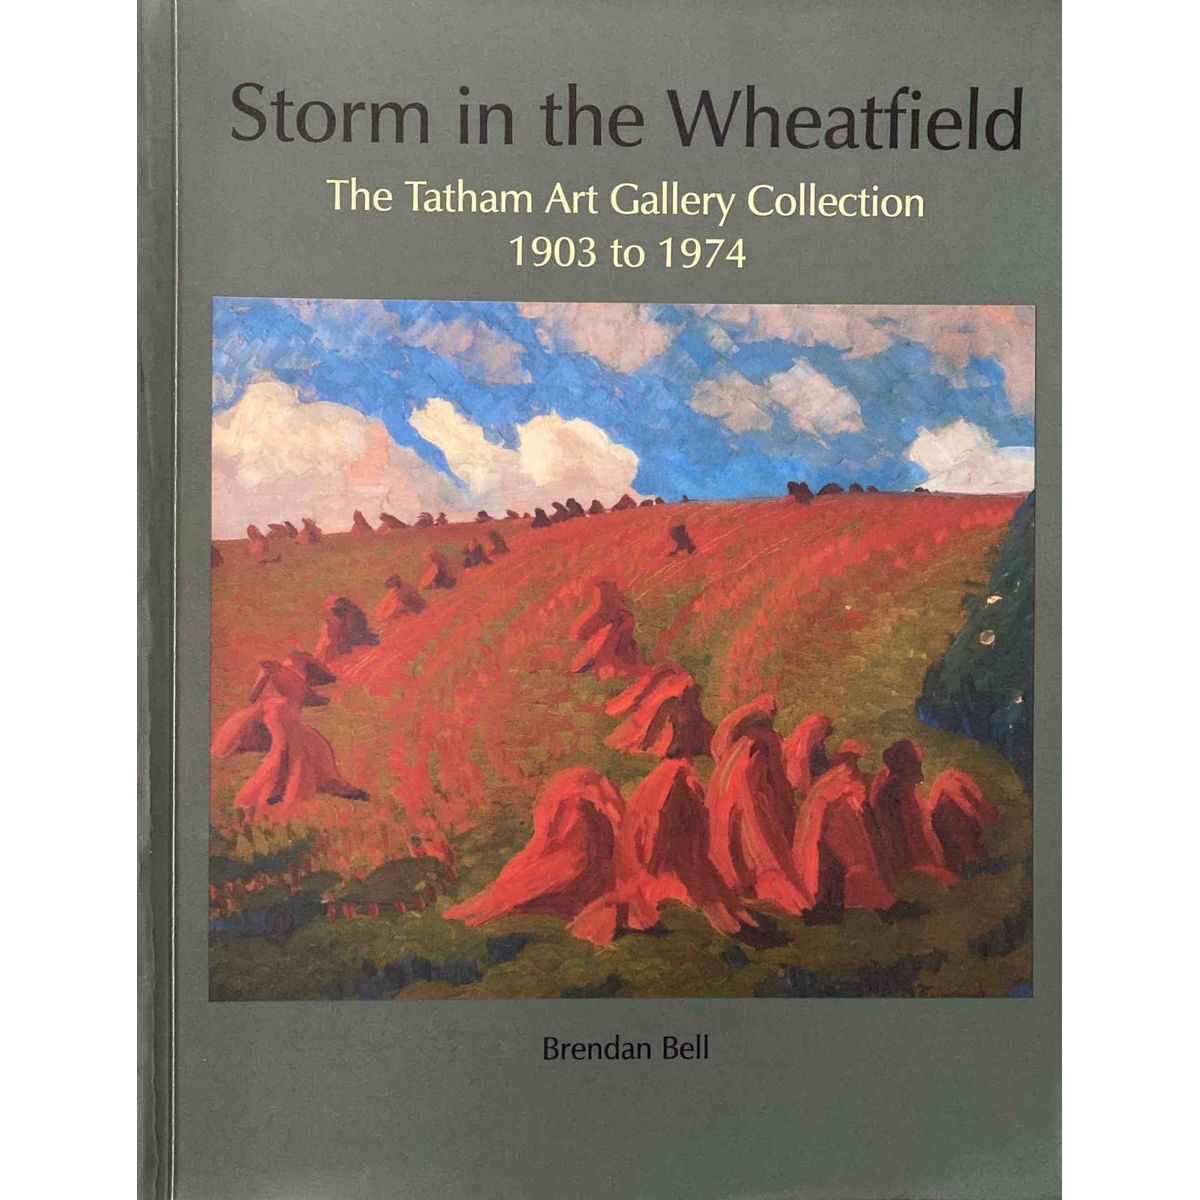 ISBN: 9780620461504 / 0620461500 - Storm in the Wheatfield: The Tatham Art Gallery Collection 1903 to 1974 by Brendan Bell [2009]